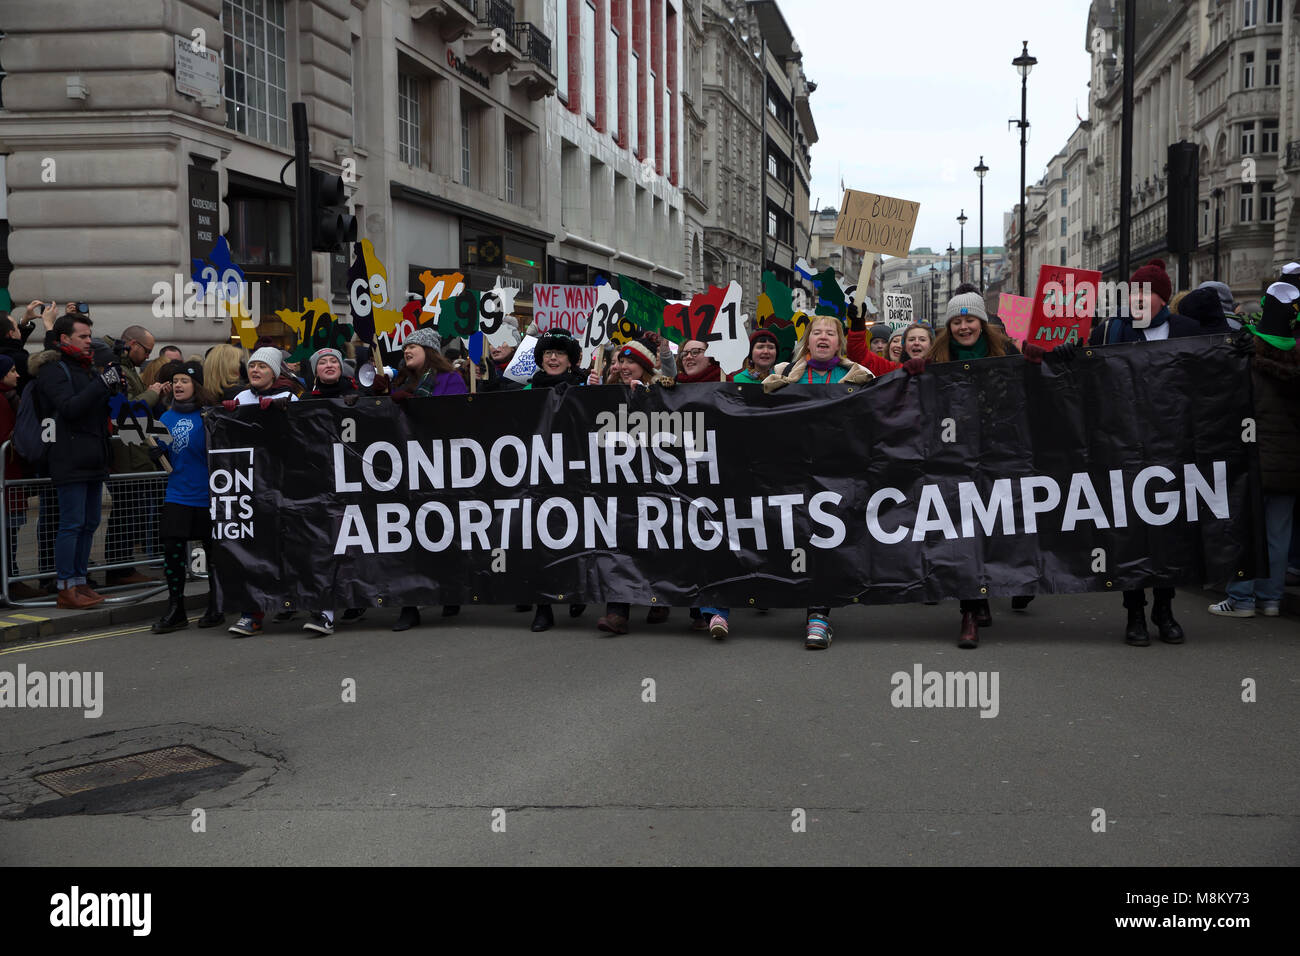 London,UK,18TH March 2018,London-Irish Abortion Rights campaign at the annual St Patrick’s Day Parade which took place in London. This years parade included Mayor of London, Sadiq Khan alongside Grand Marshalls Gloria Hunniford & Imelda Staunton and famous London Irish women including - Angela Scanlon (TV), Angela Brady (Architecture), Cecila Gallagher (Chairperson of the Woman's Irish Network). As well as the parade Irish acts performed in Trafalgar Square from Noon.©Keith Larby/Alamy Live News Stock Photo